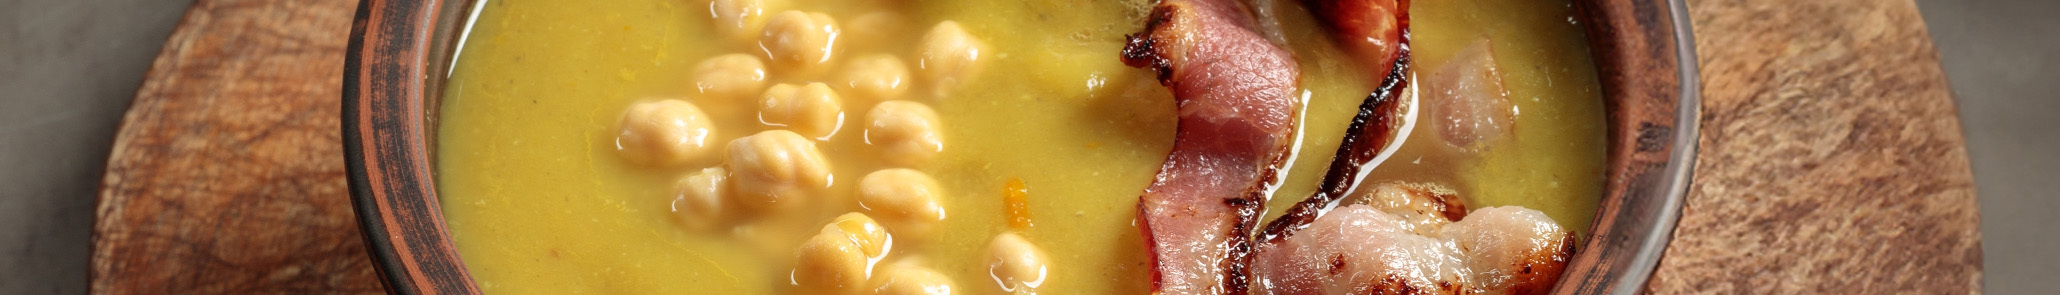 Creamy Great Northern Bean Soup with bacon  